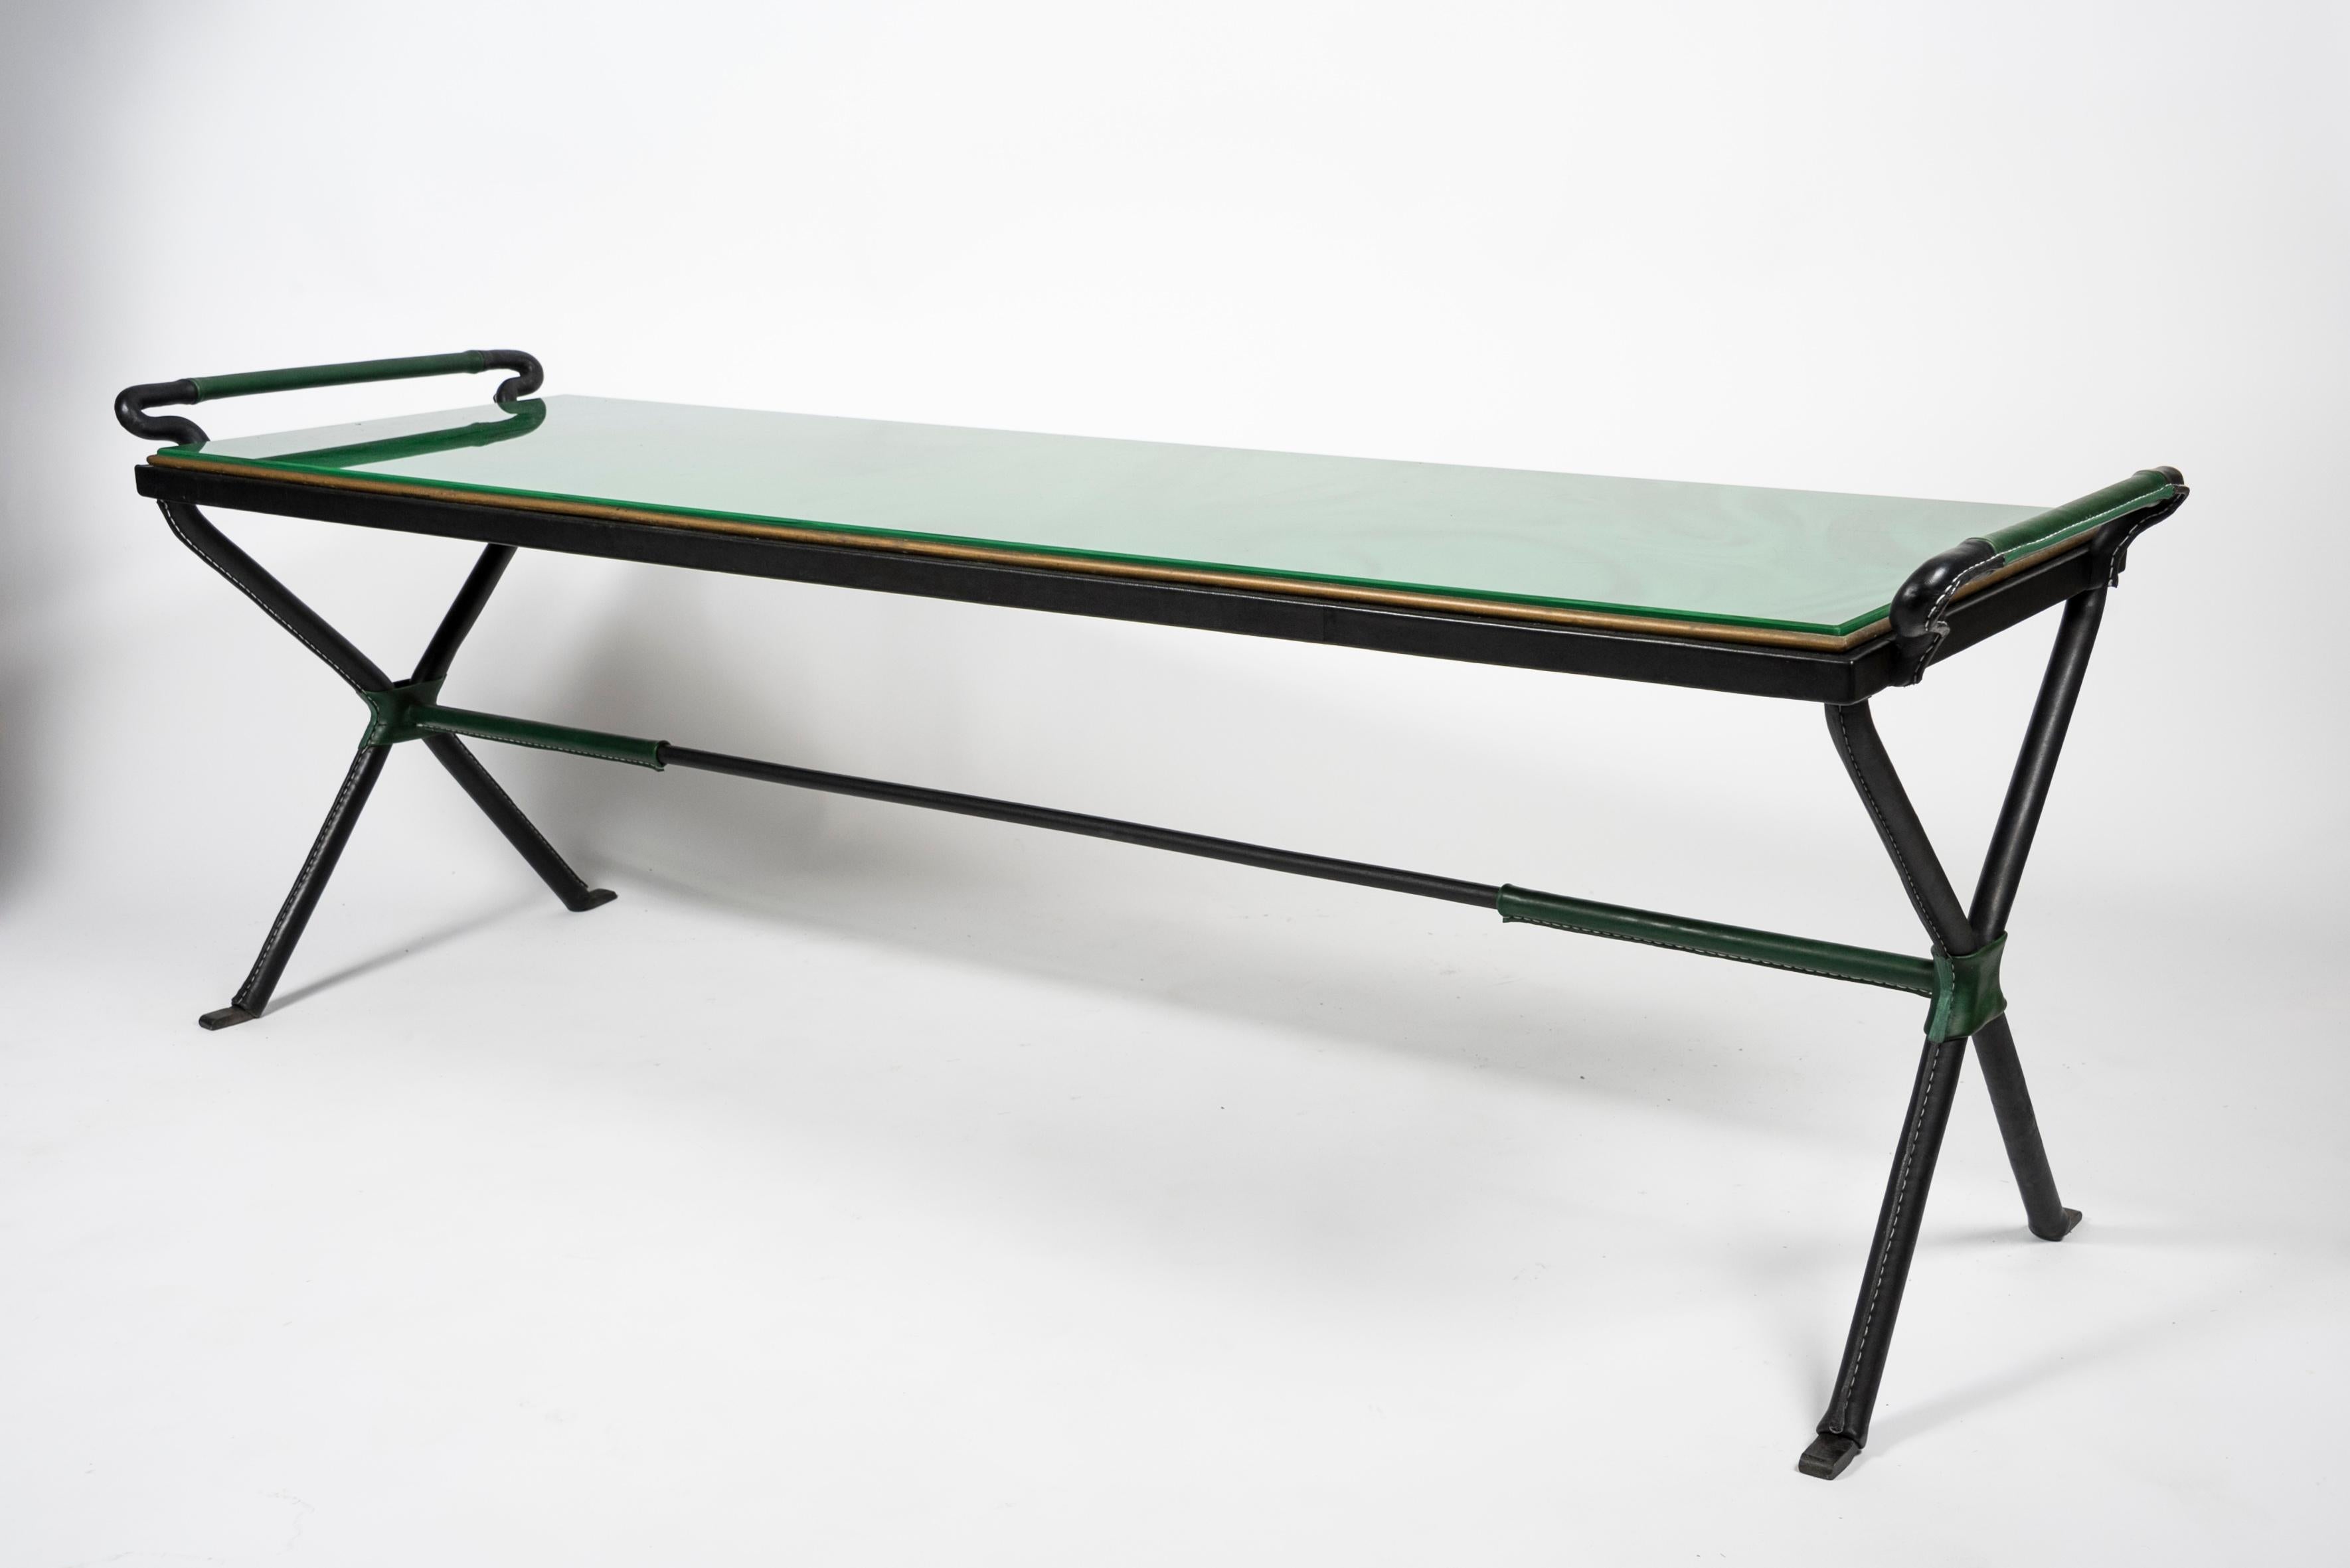 Long stitched leather cocktail table with a stunning green opaline glass.
1950s
France.